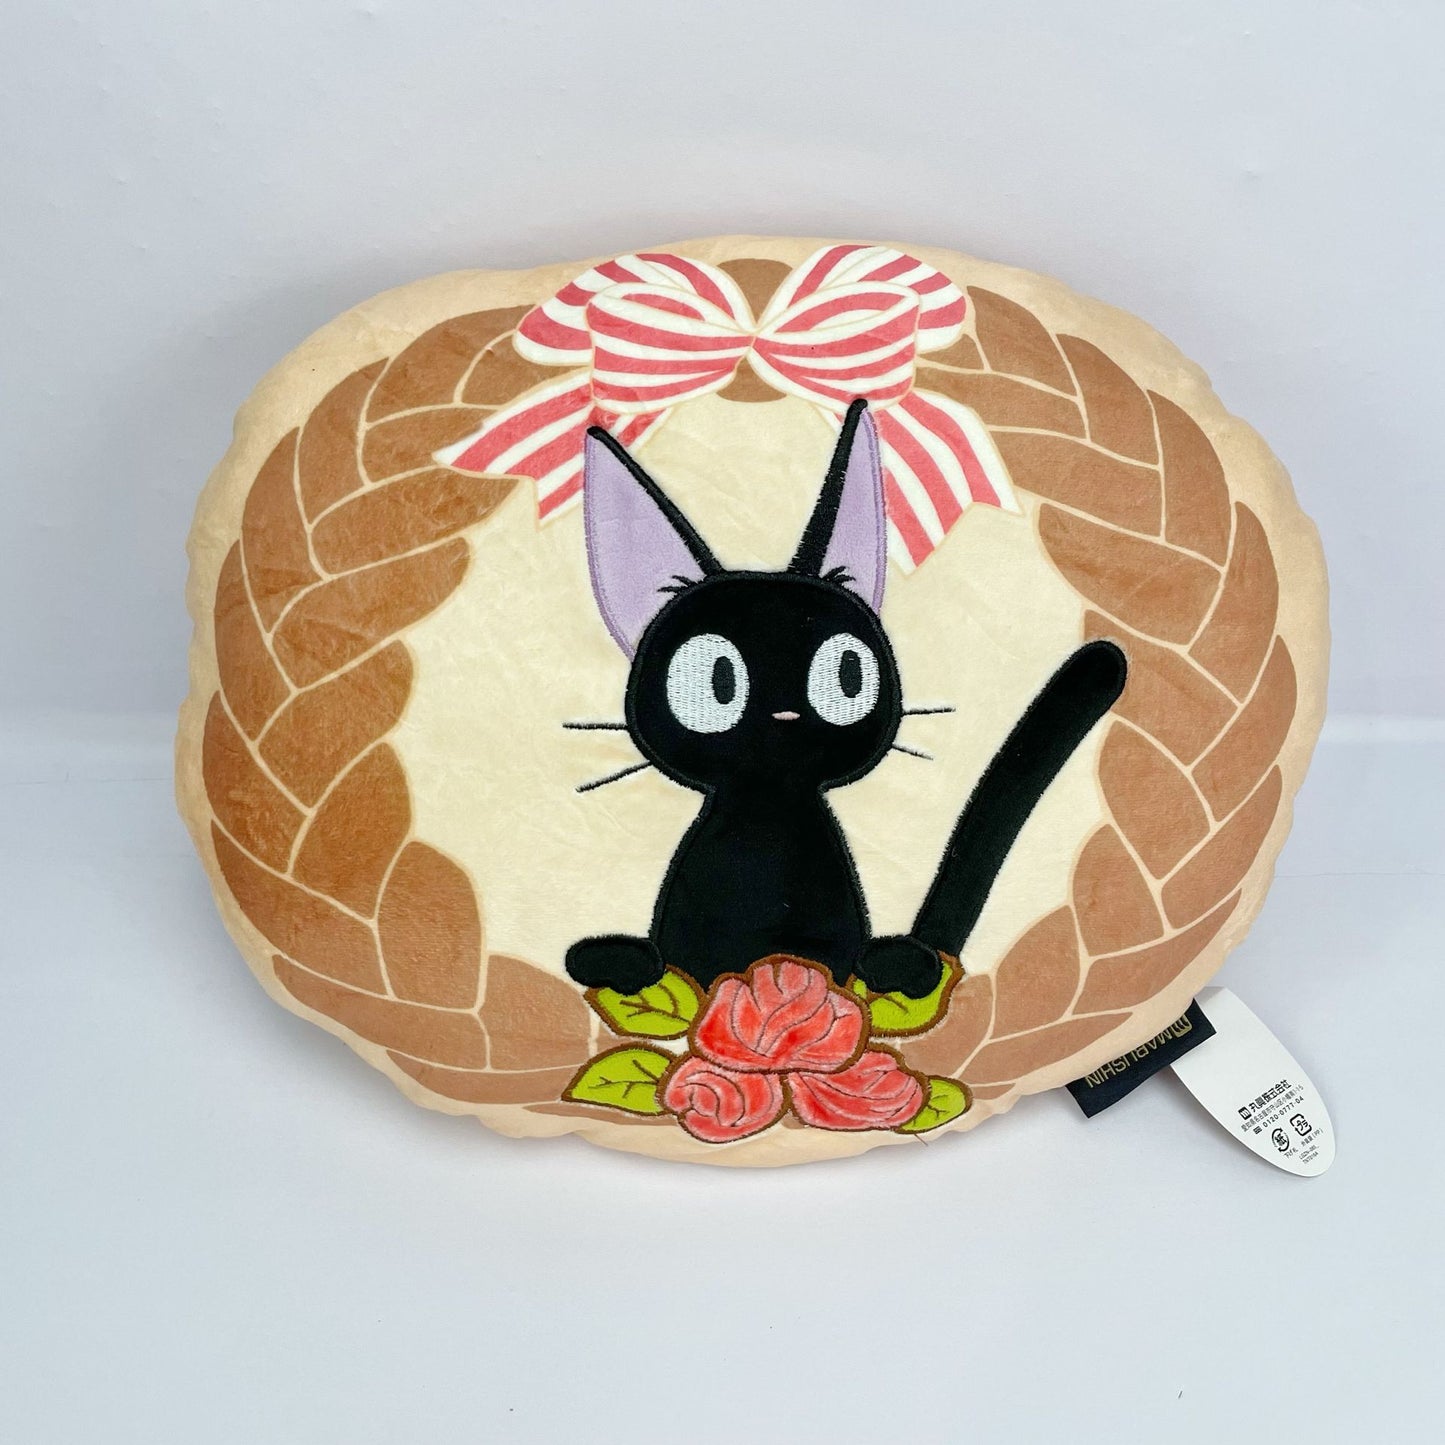 Exported to Japan Cute Embroidery Totoro Black Cat Cushion Pillow